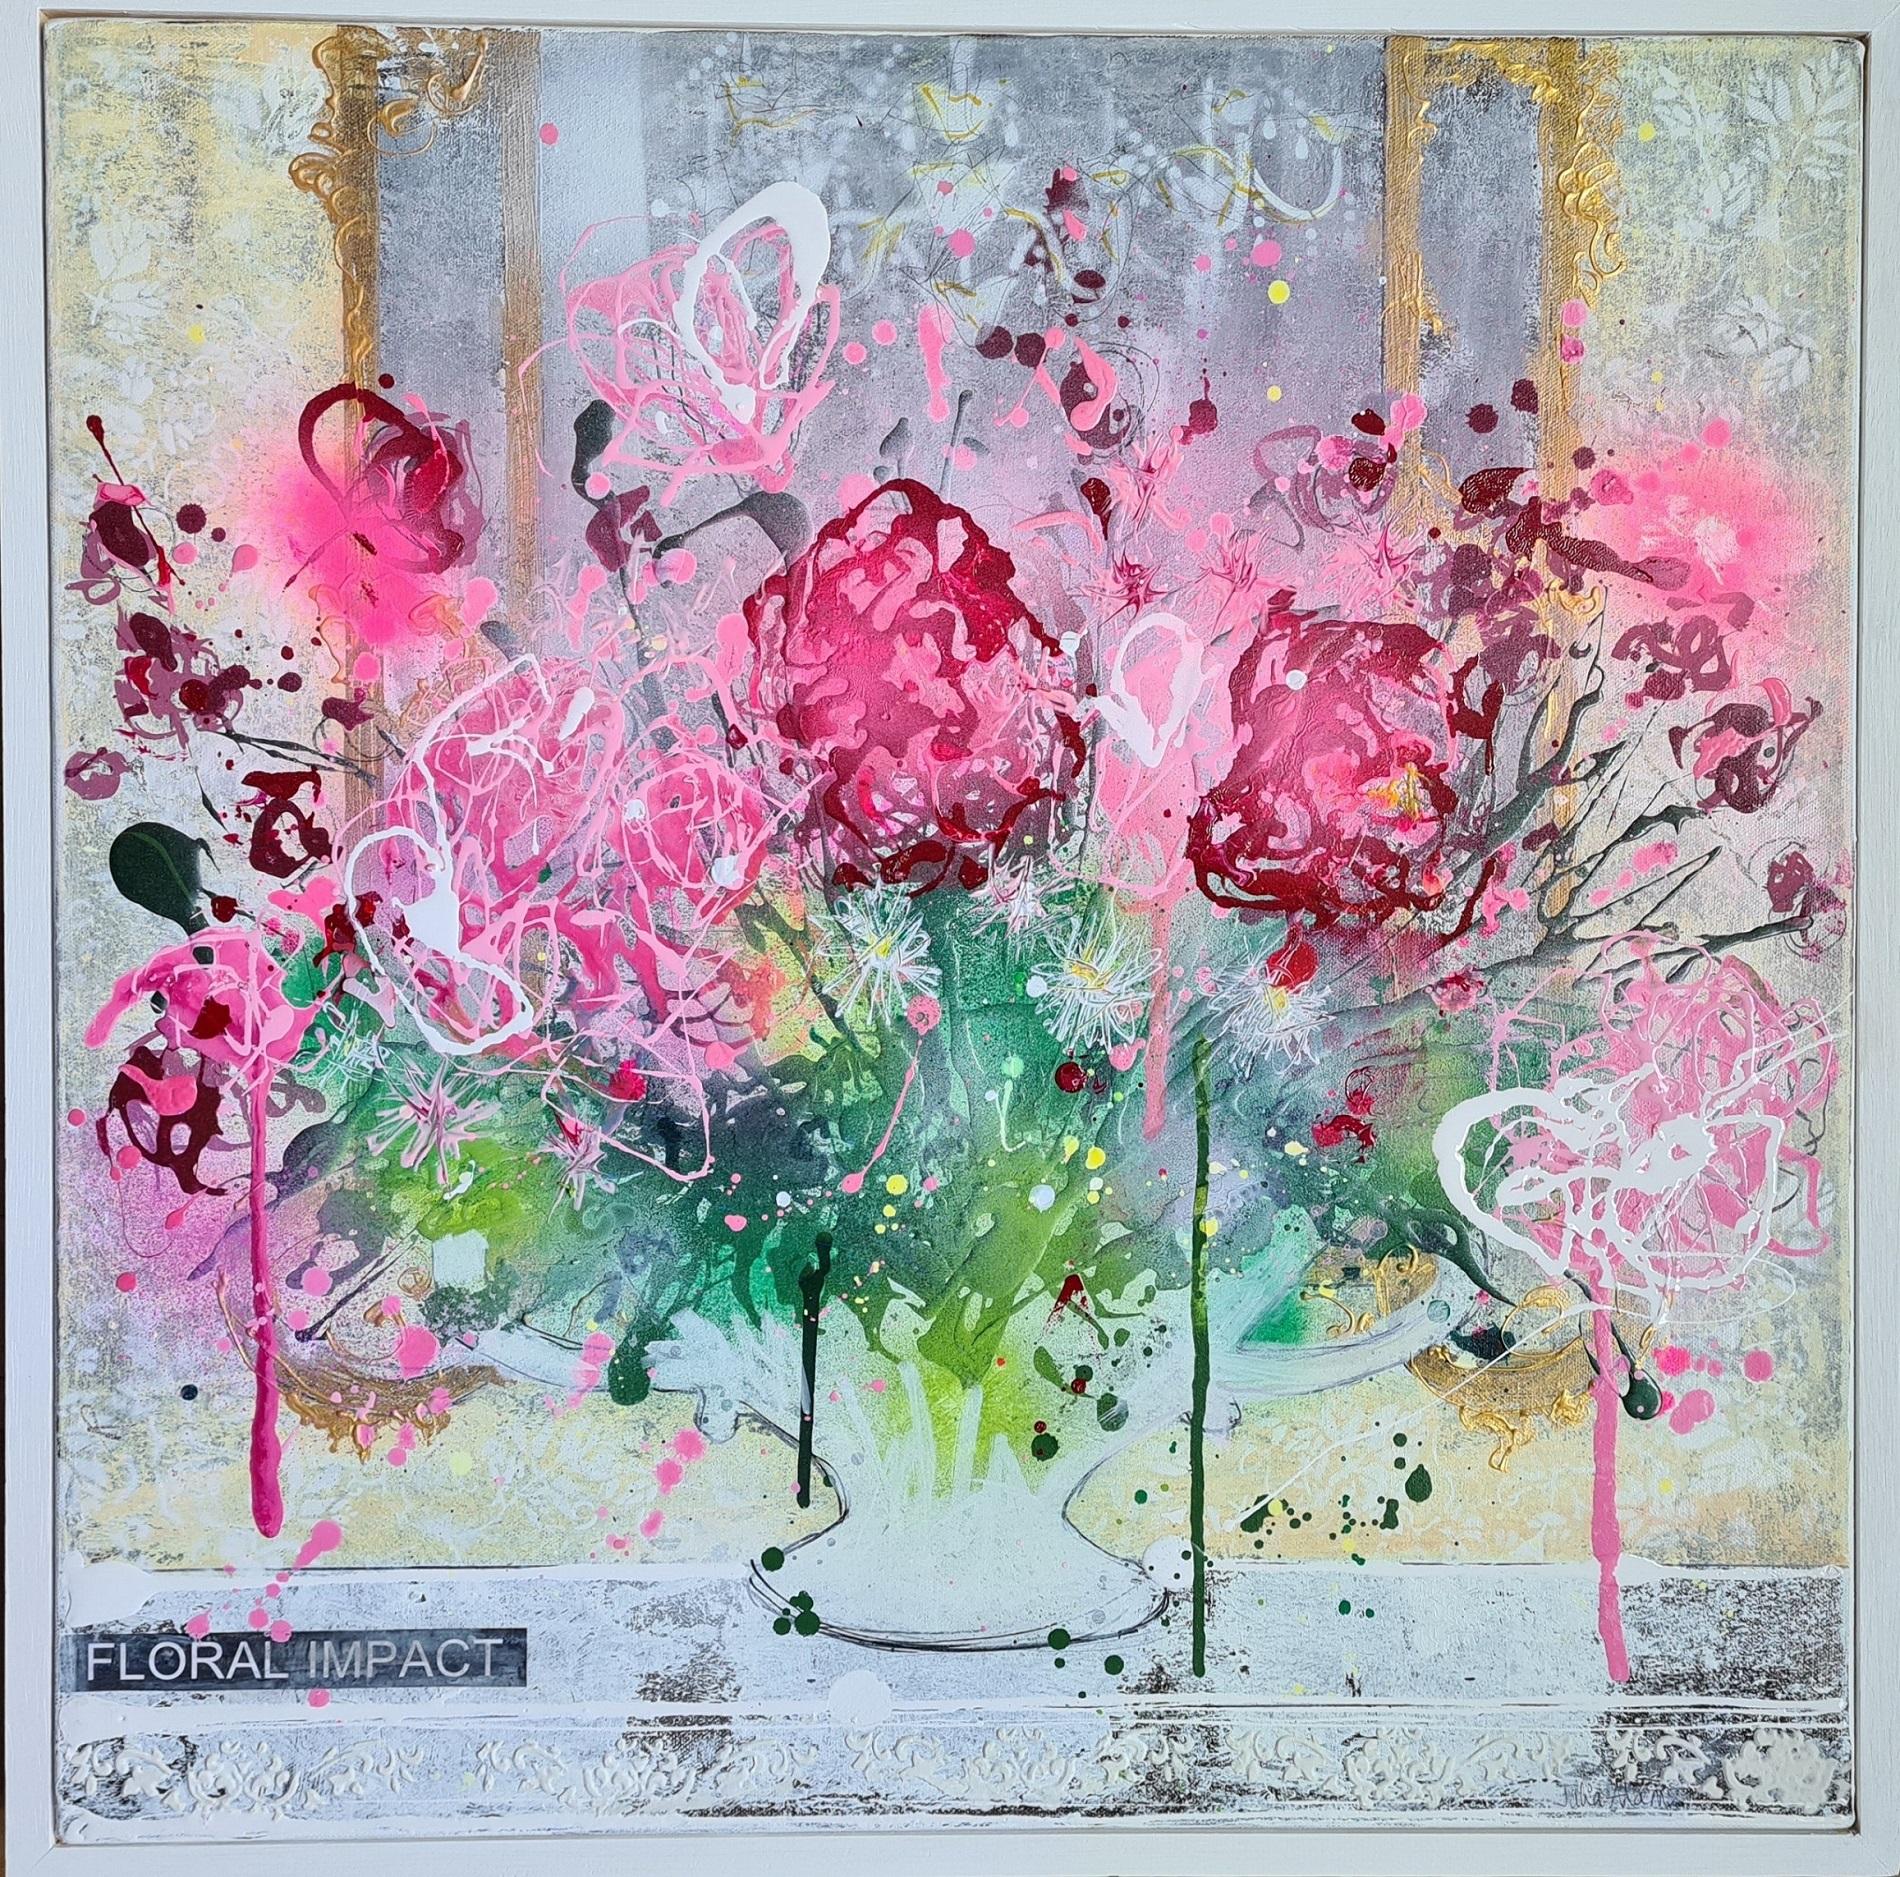 Flower Market and Floral Impact diptych
Overall size: H135 x W120

Flower Market by Julia Adams [2021]

original
Mxed media on canvas
Image size: H:75 cm x W:60 cm
Complete Size of Unframed Work: H:75 cm x W:60 cm x D:3.8cm
Sold Unframed
Please note